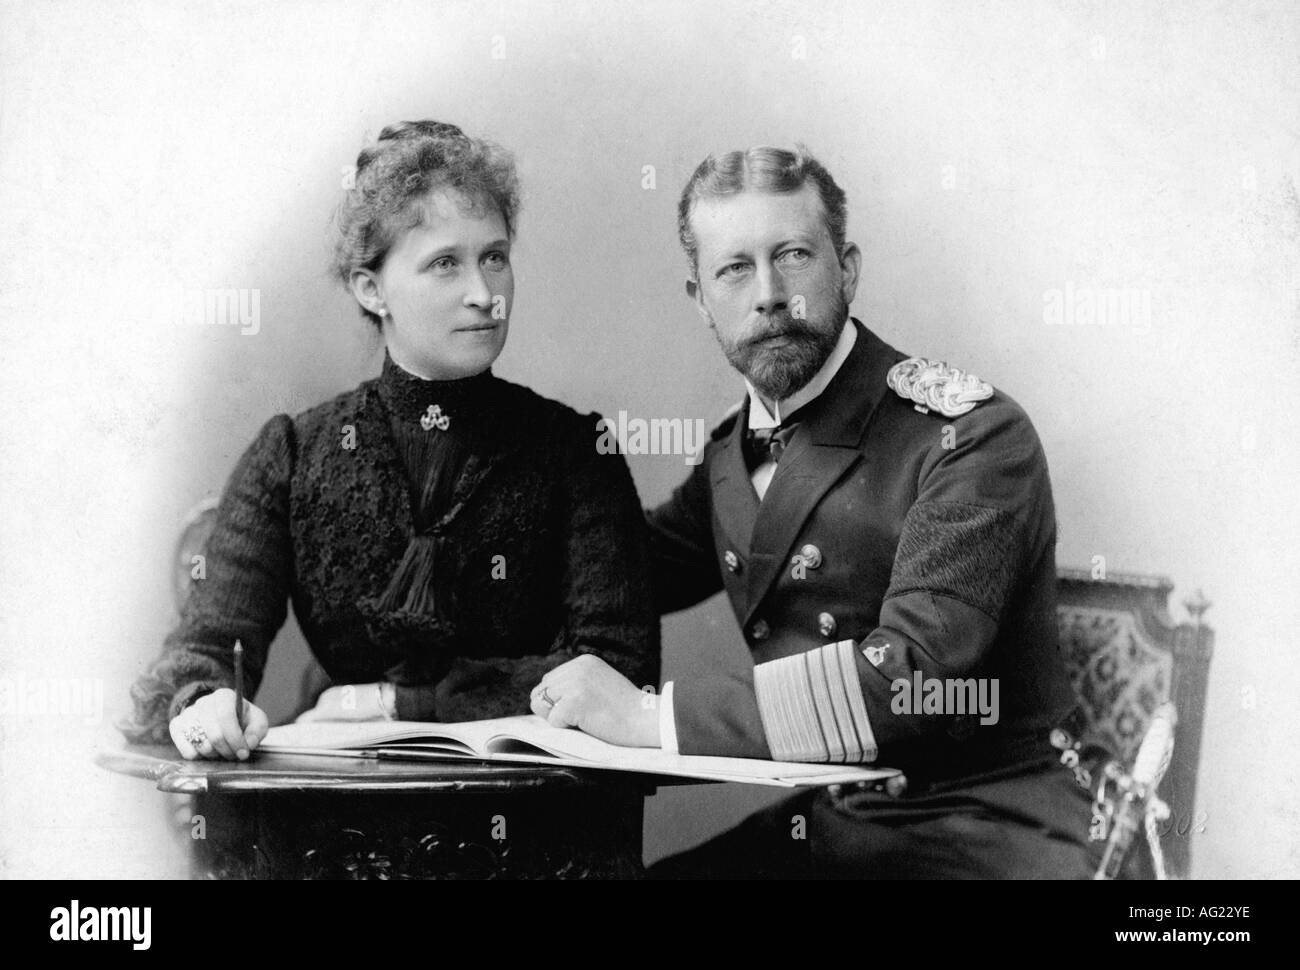 Heinrich, 14.8.1862 - 20.4.1929, Prince of Prussia, German Admiral, with wife princess Irene, photo by J.C. Scharwächter, Berlin, circa 1900, Henry, Hohenzollern, princess of Hesse and of Rhine, Germany, Uniform, , Stock Photo